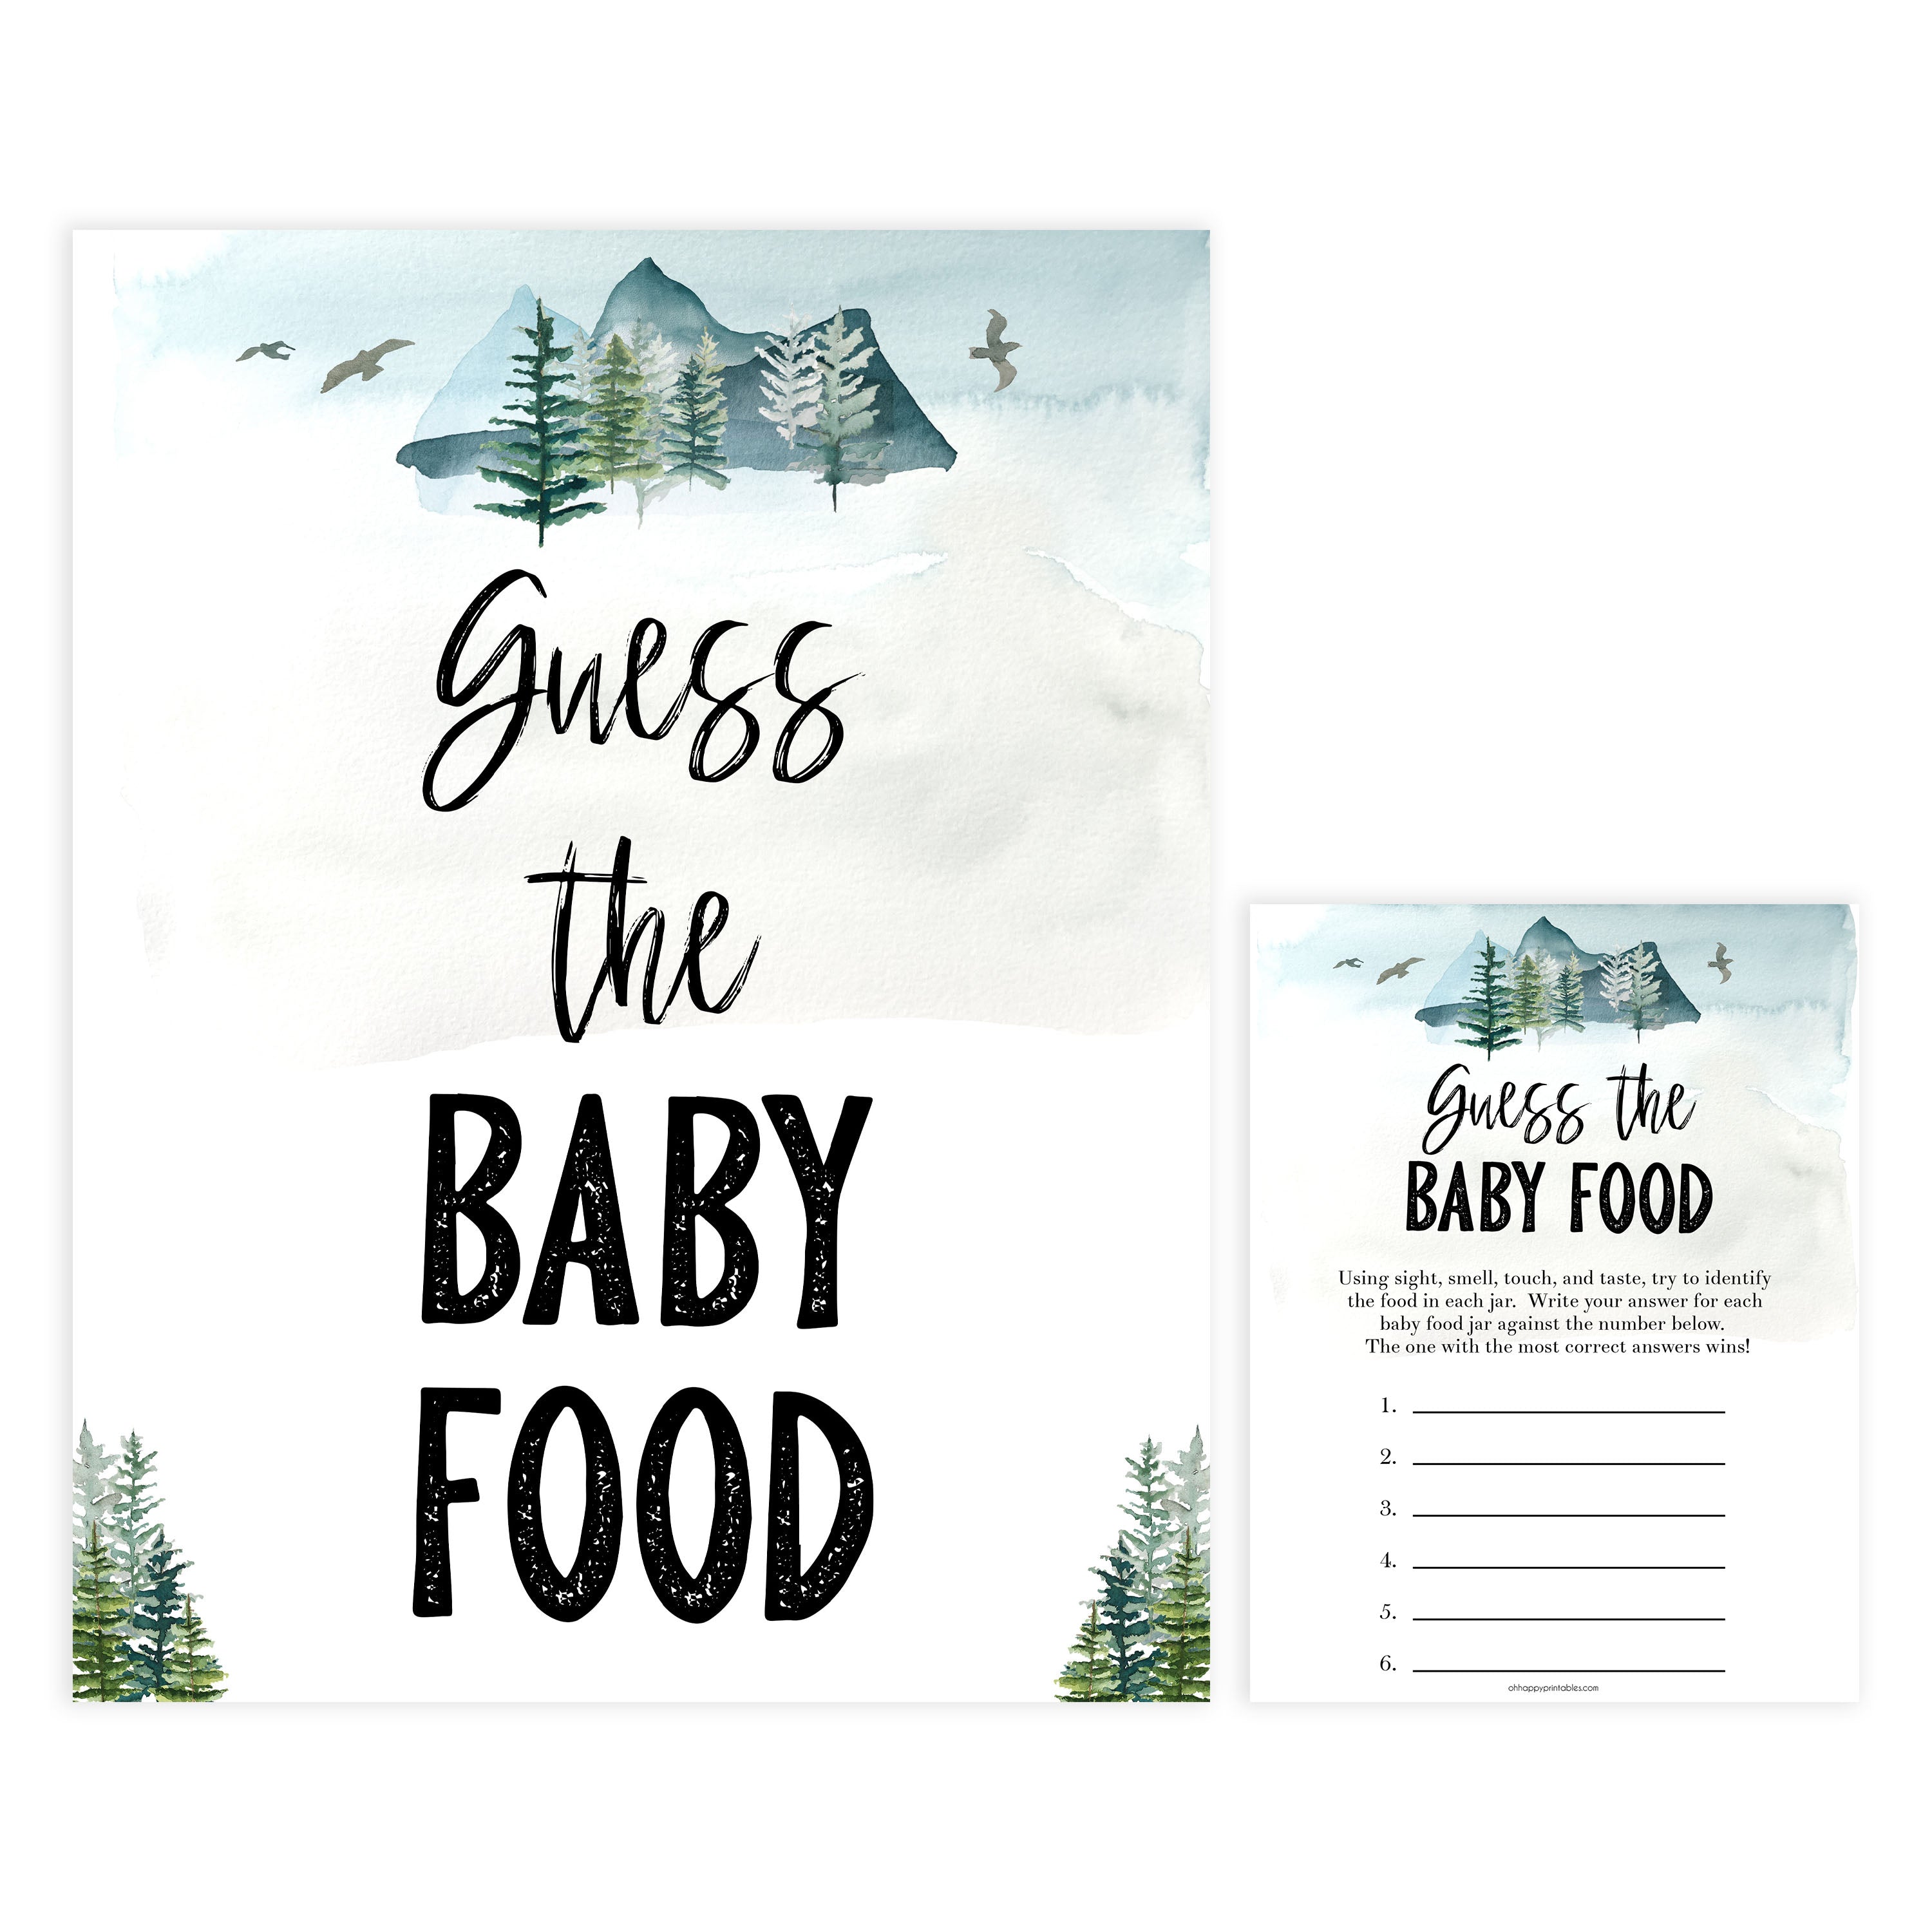 guess the baby food game, Printable baby shower games, adventure awaits baby games, baby shower games, fun baby shower ideas, top baby shower ideas, adventure awaits baby shower, baby shower games, fun adventure baby shower ideas